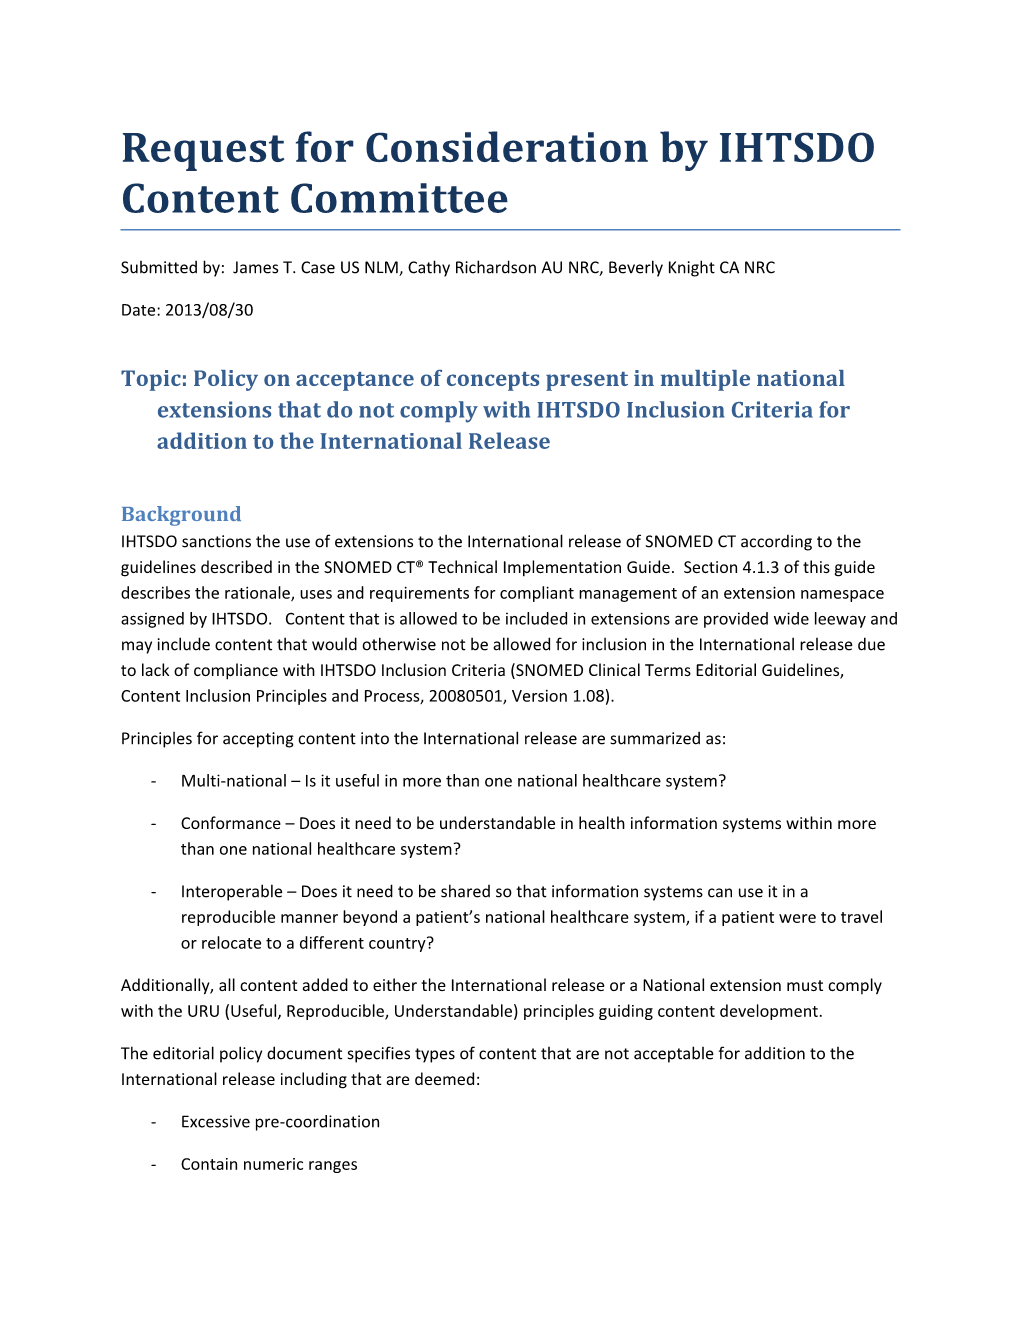 Request for Consideration by IHTSDO Content Committee